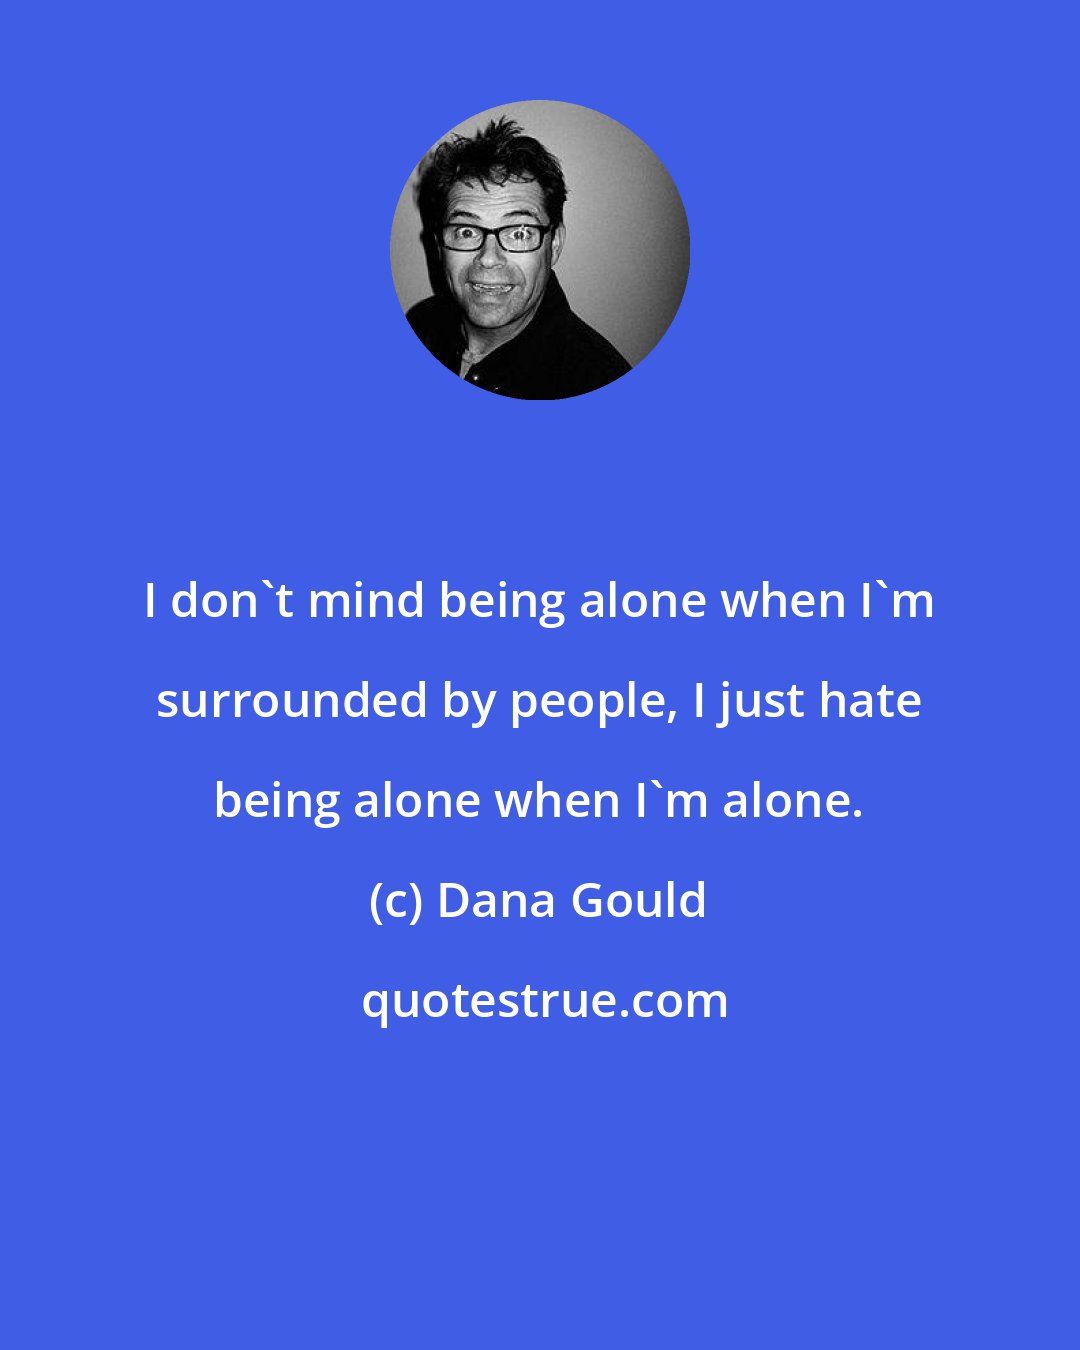 Dana Gould: I don't mind being alone when I'm surrounded by people, I just hate being alone when I'm alone.